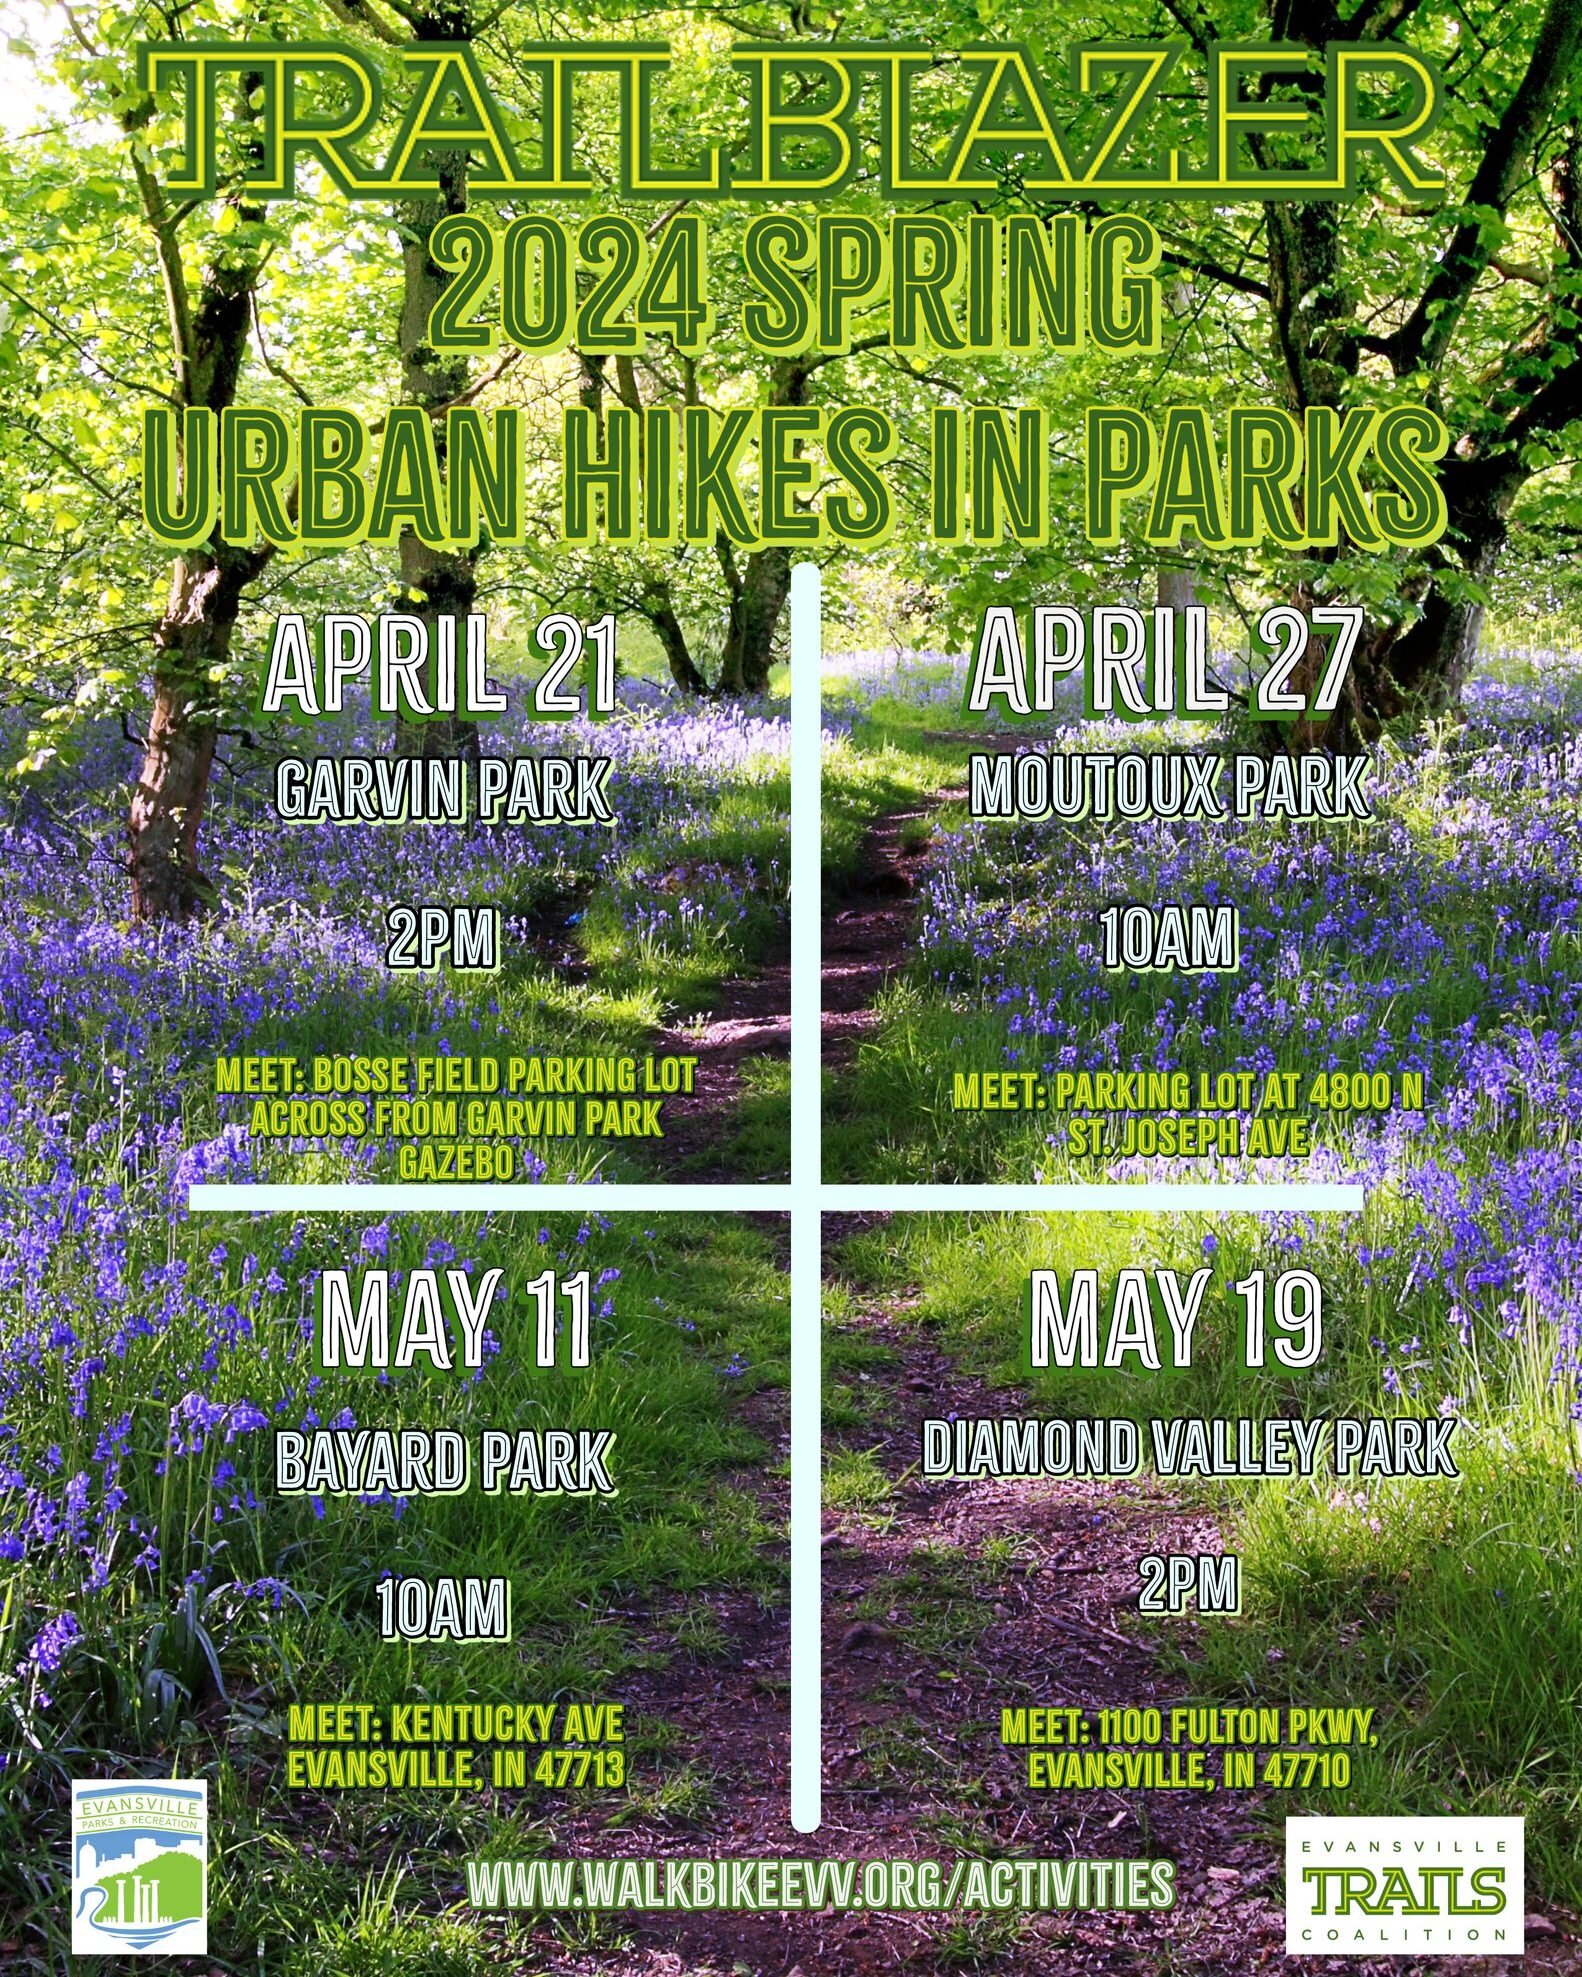 🚶🛤 🏞

More hikes coming at you this Spring! In partnership with Evansville Department of Parks &amp; Recreation, our next round of Urban Hikes will be within our local Parks! 

Interested in leading a hike, contact us at trailscoalition@walkbikevv